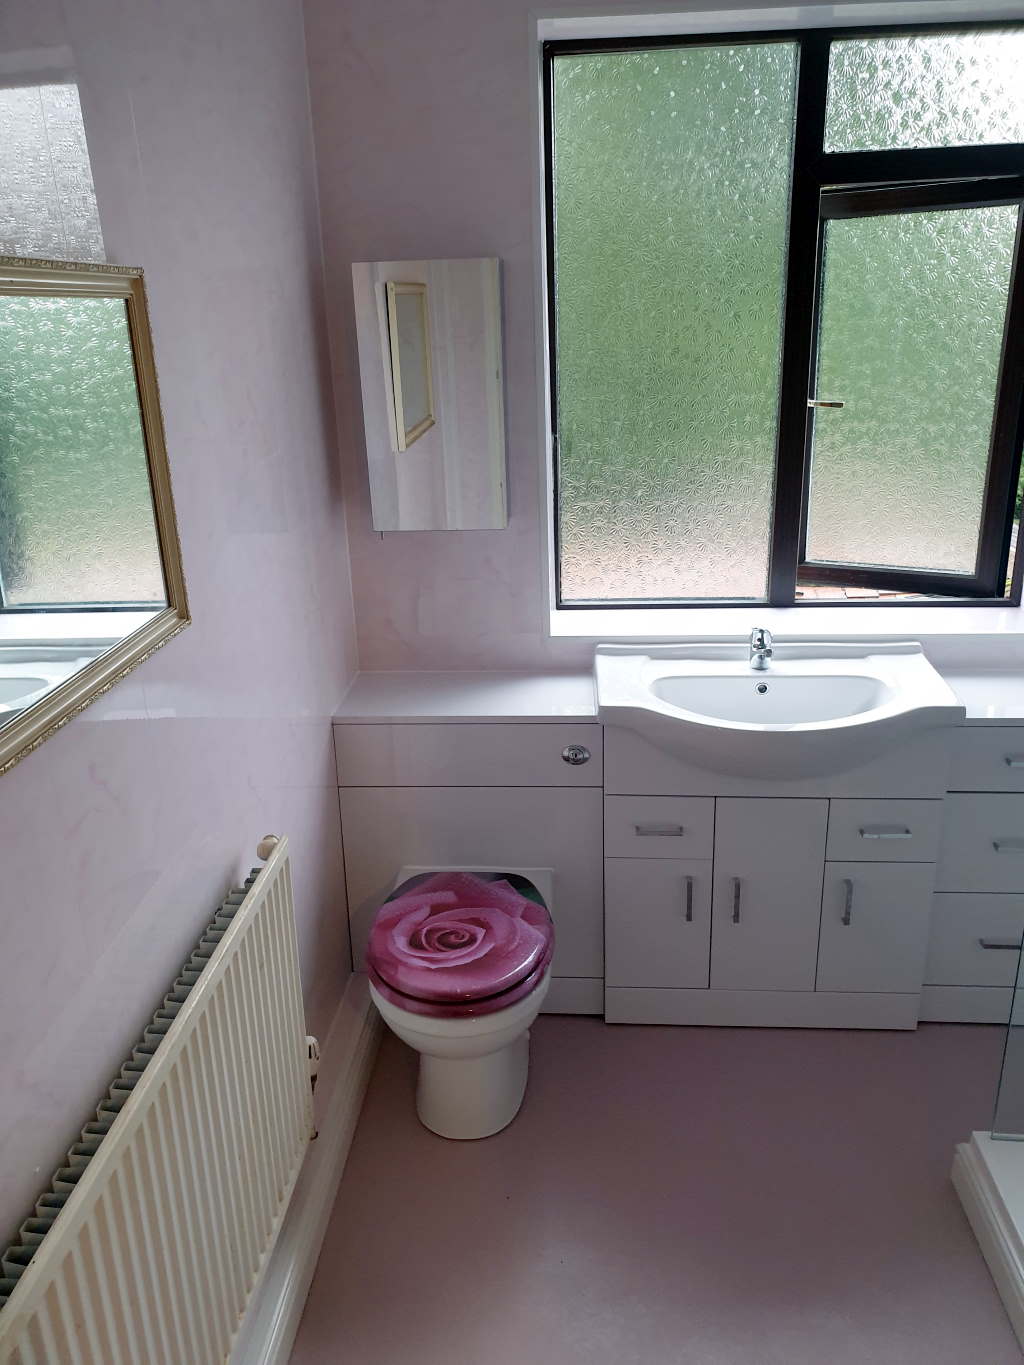 New Ensuite Bathroom Fitter in Walsall Mrs Holmes Walsall